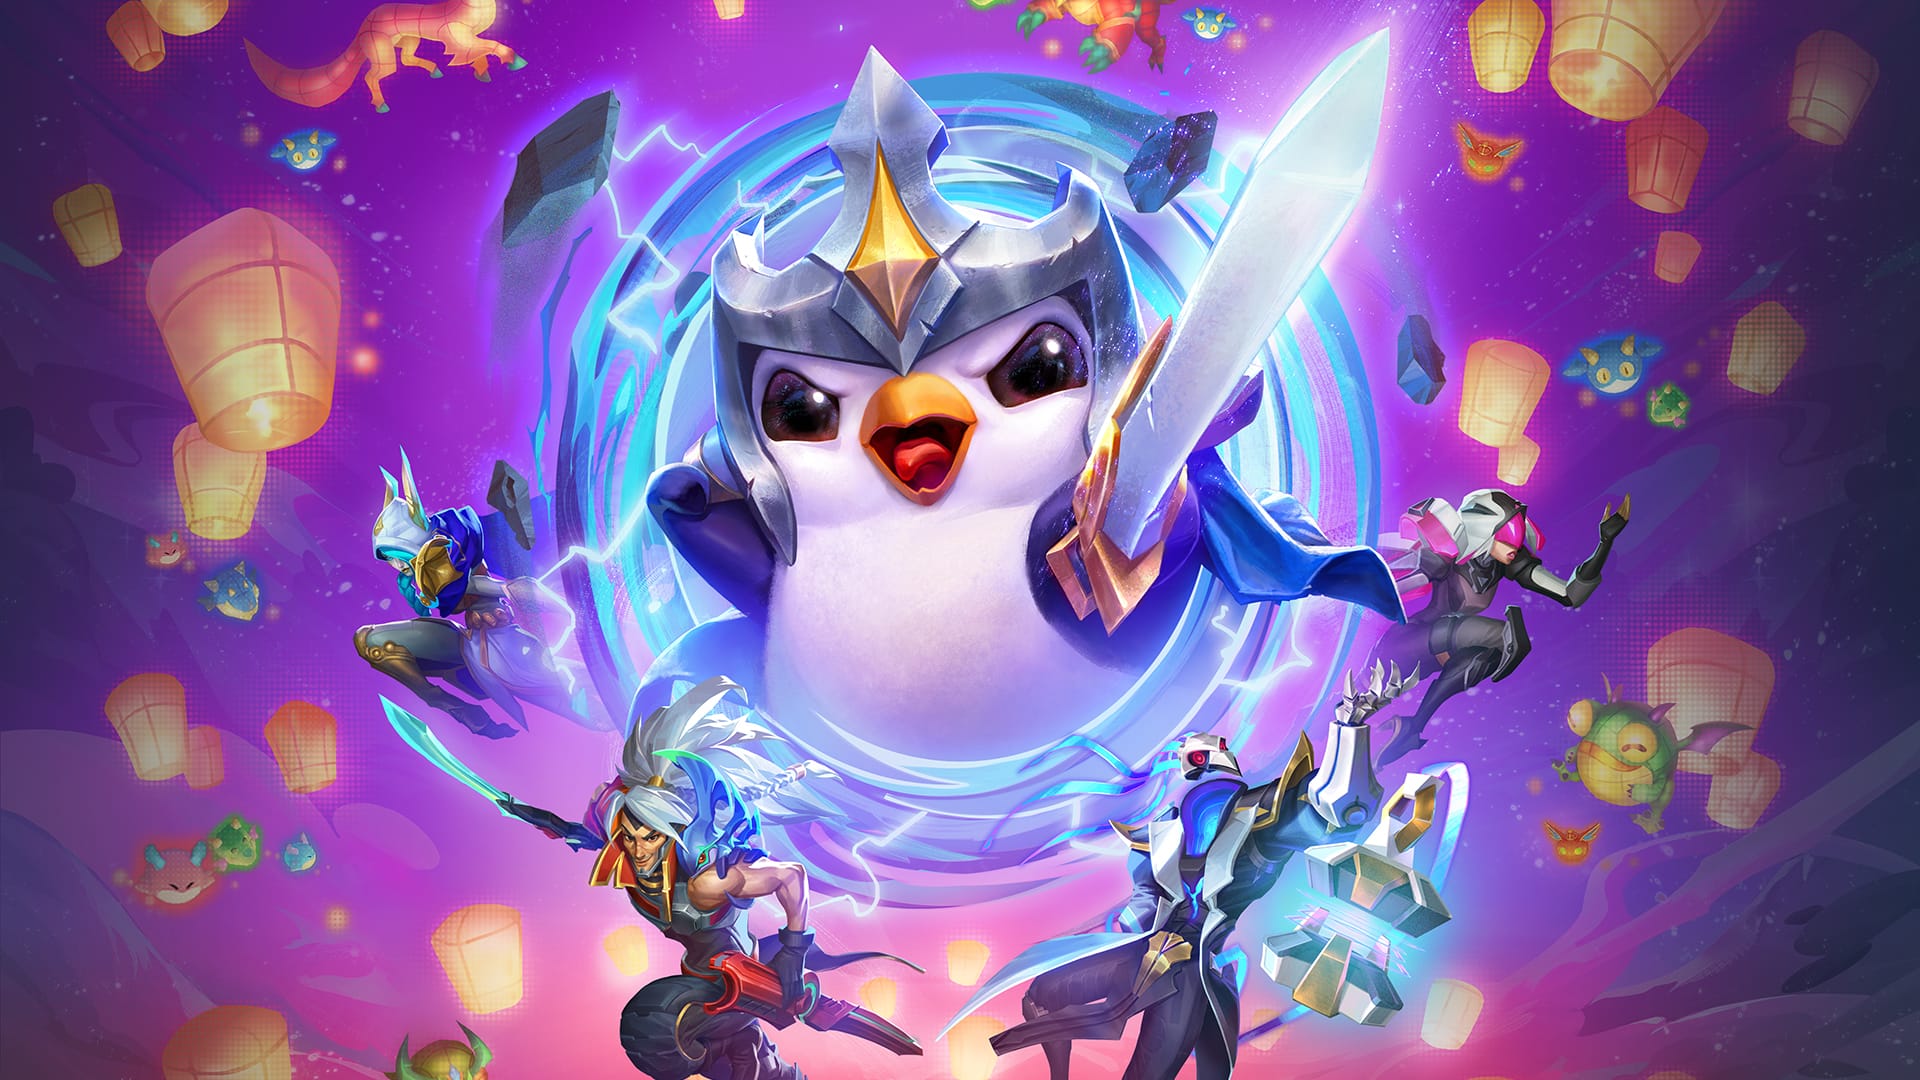 Riding the Celestial Wave: Teamfight Tactics Rings in the Lunar New Year with Set 3.5 Revival and Dazzling Year of the Dragon Cosmetics